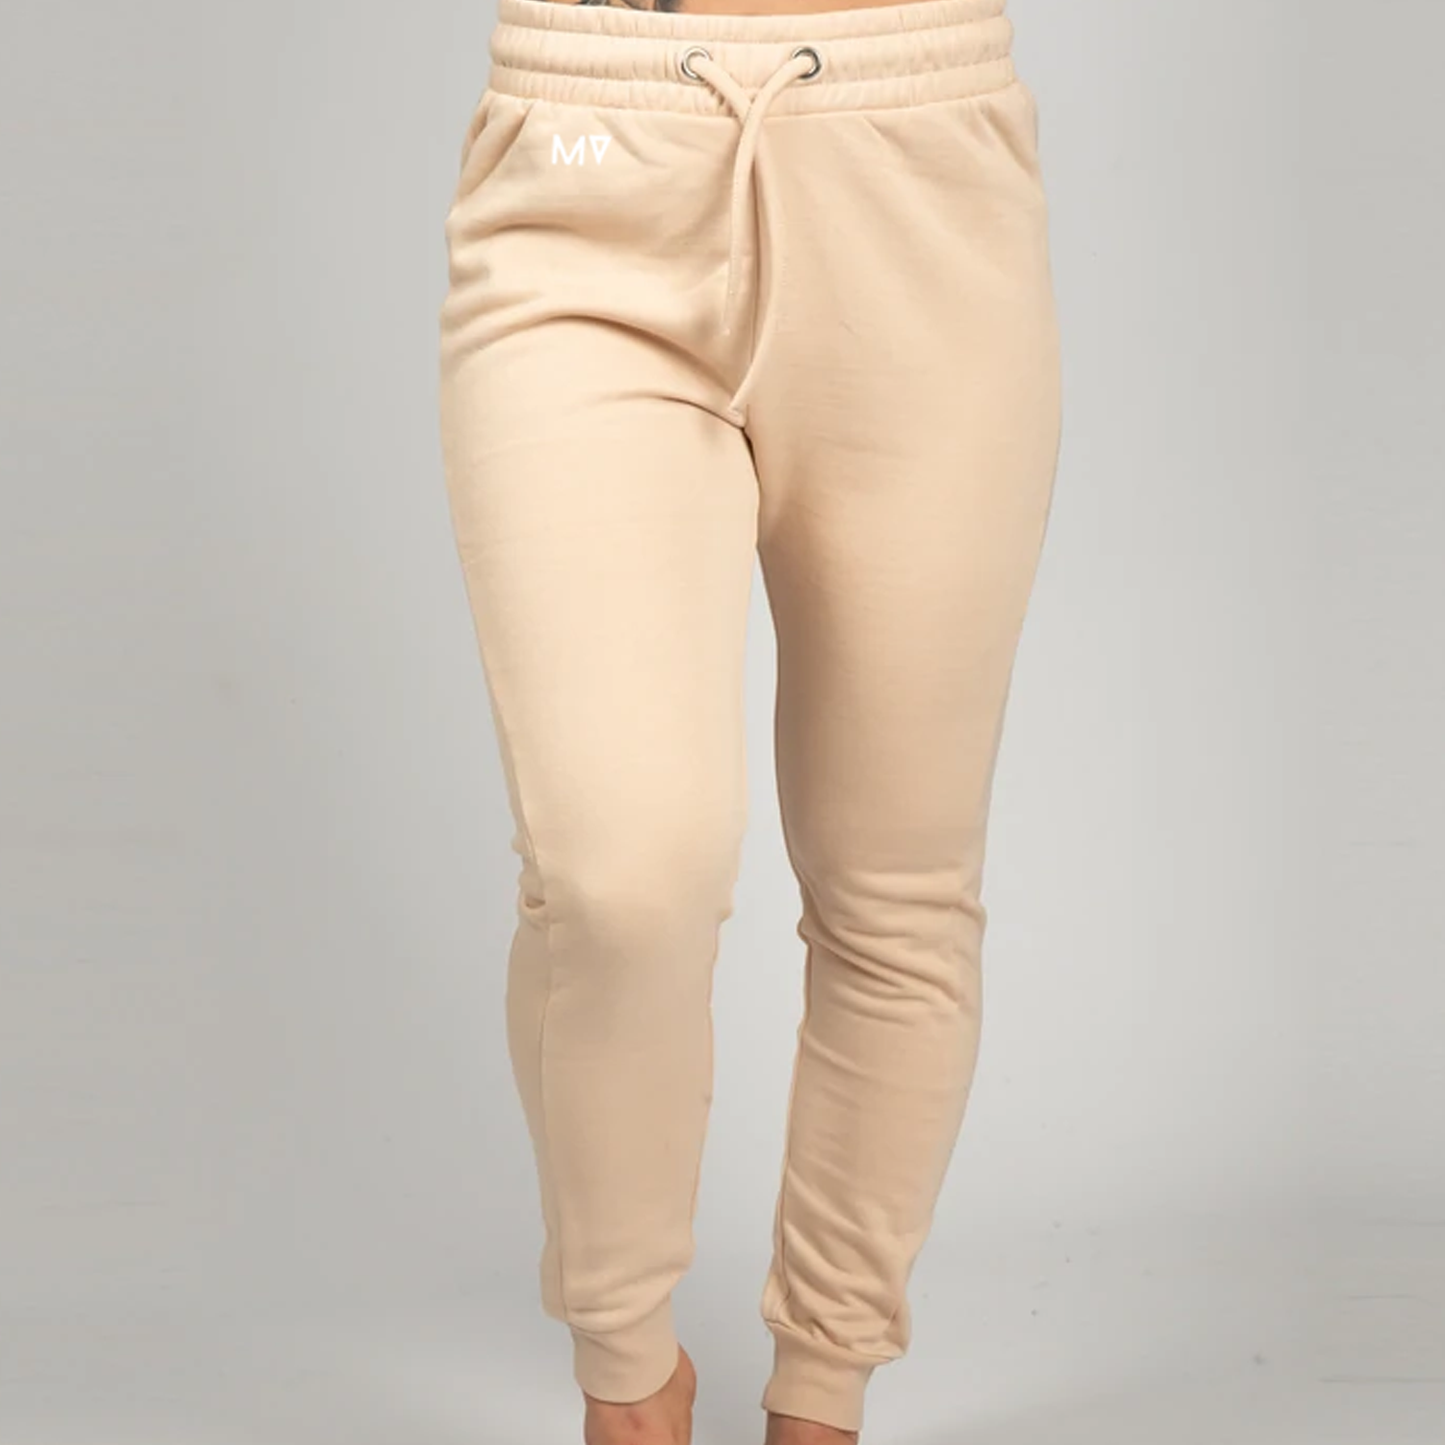 Ladies MV Fitted Joggers - Nude